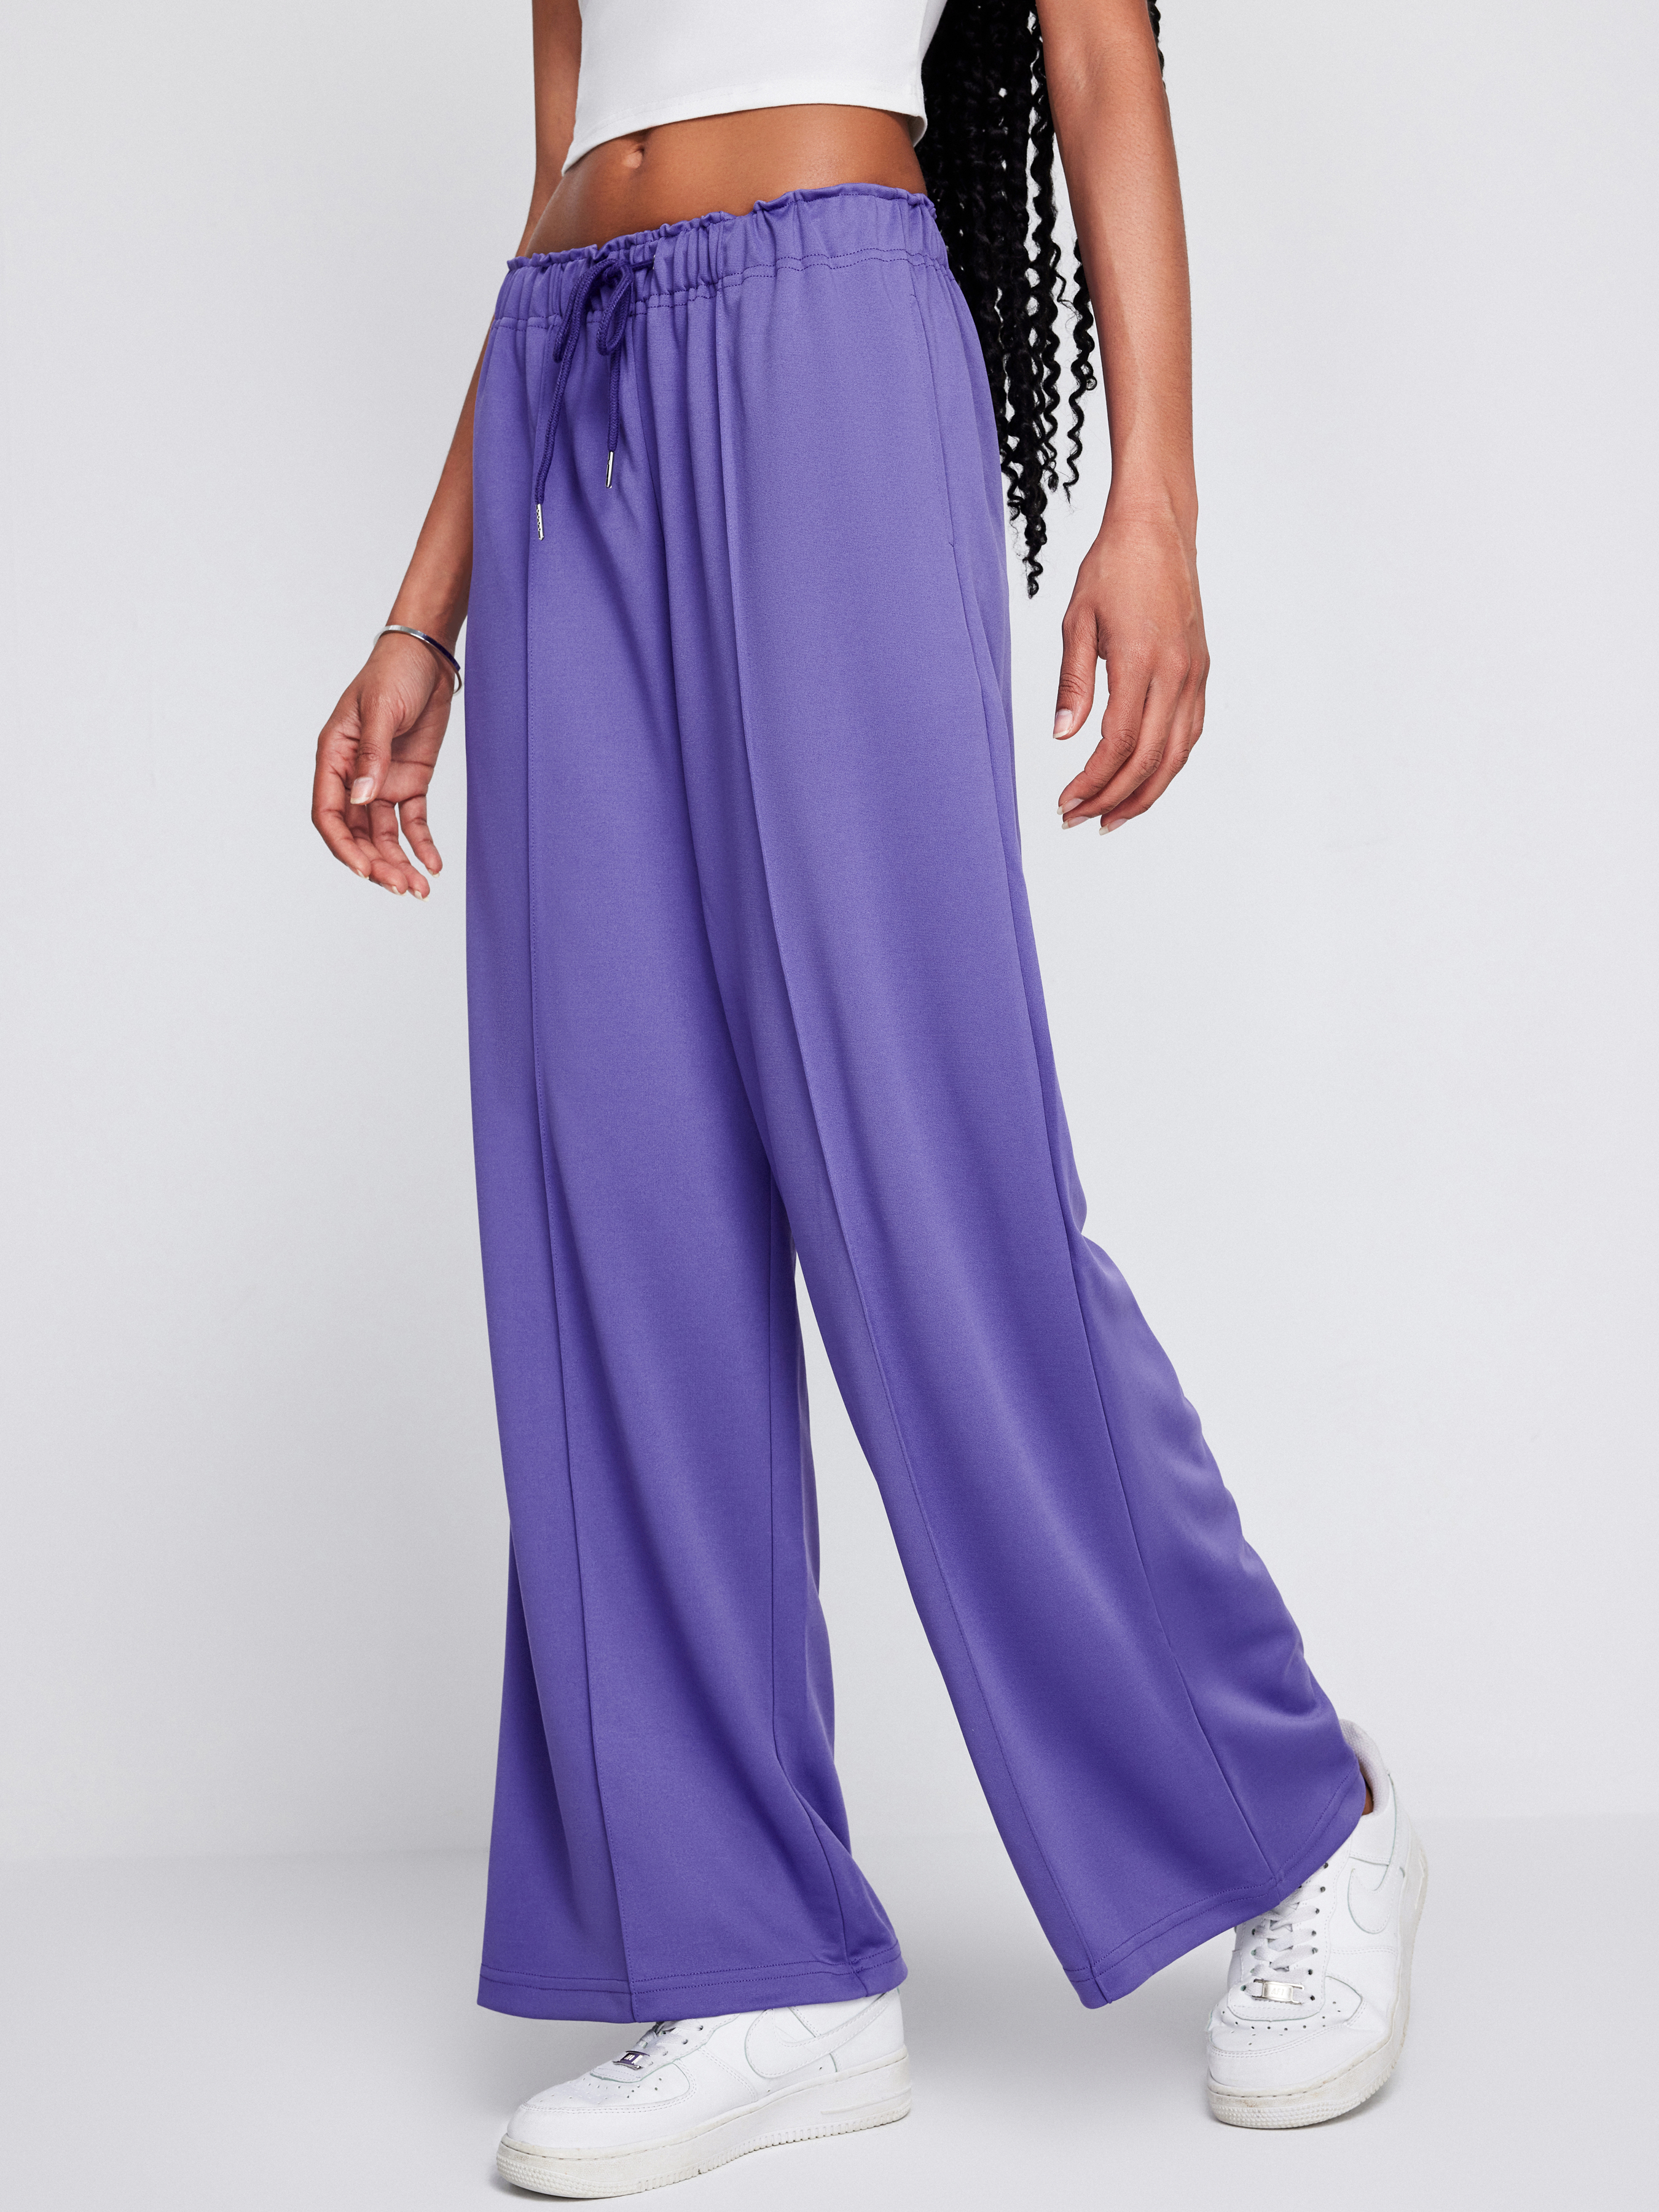 Women Purple Trousers / High Waist Wide Leg Pants / Formal Trousers /  Casual Flared Violet Trousers / Fashion Pants With Belt 8 Colors - Etsy